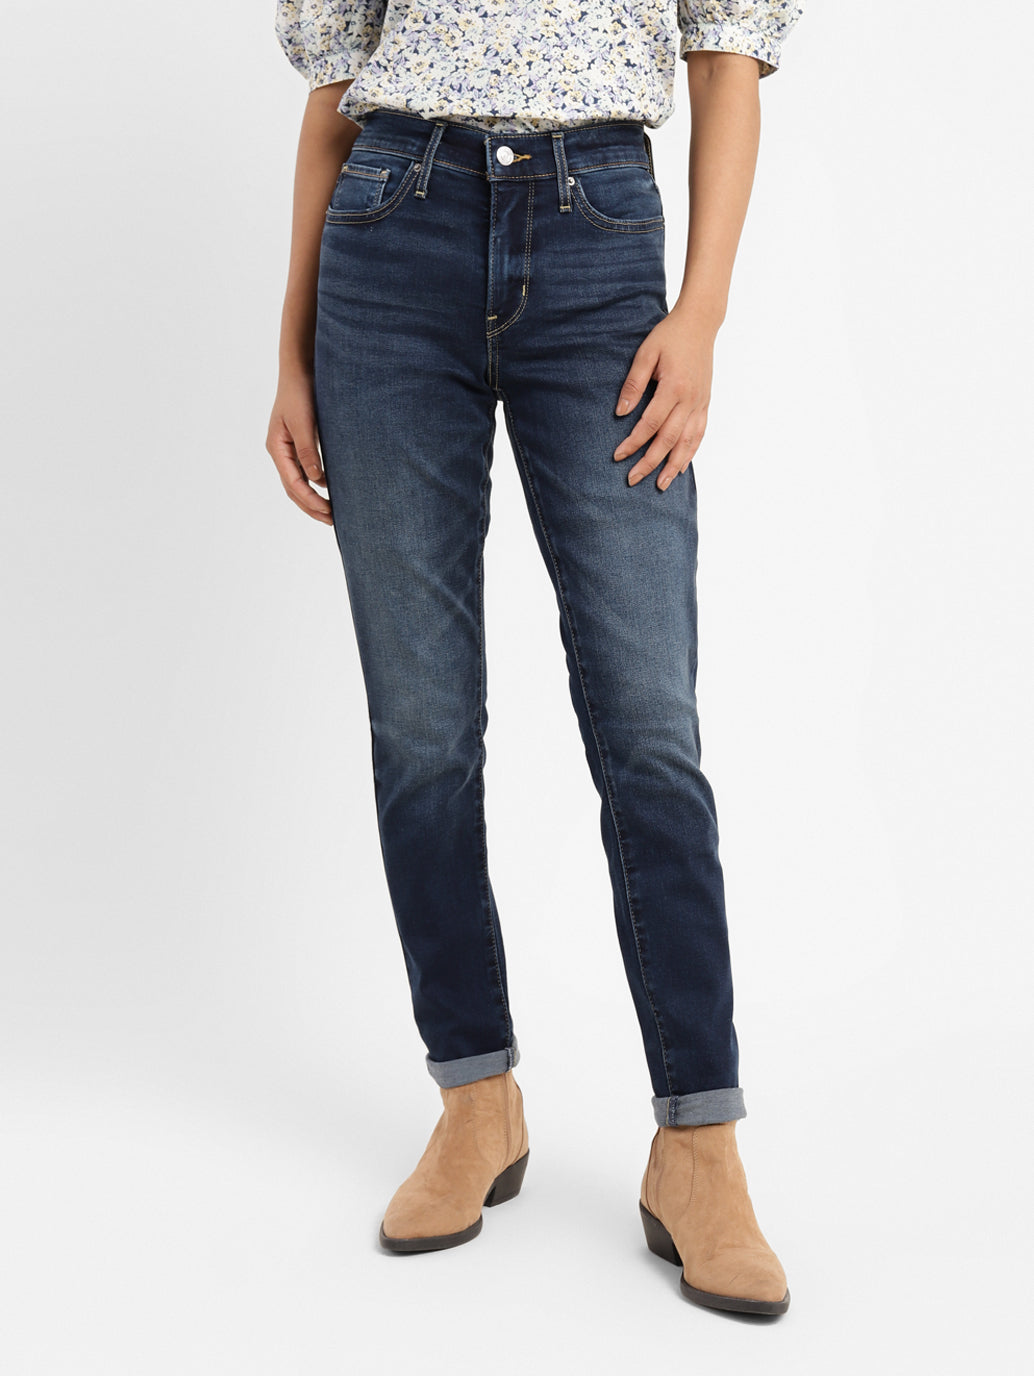 Women's High Rise 311 Shaping Skinny Fit Jeans